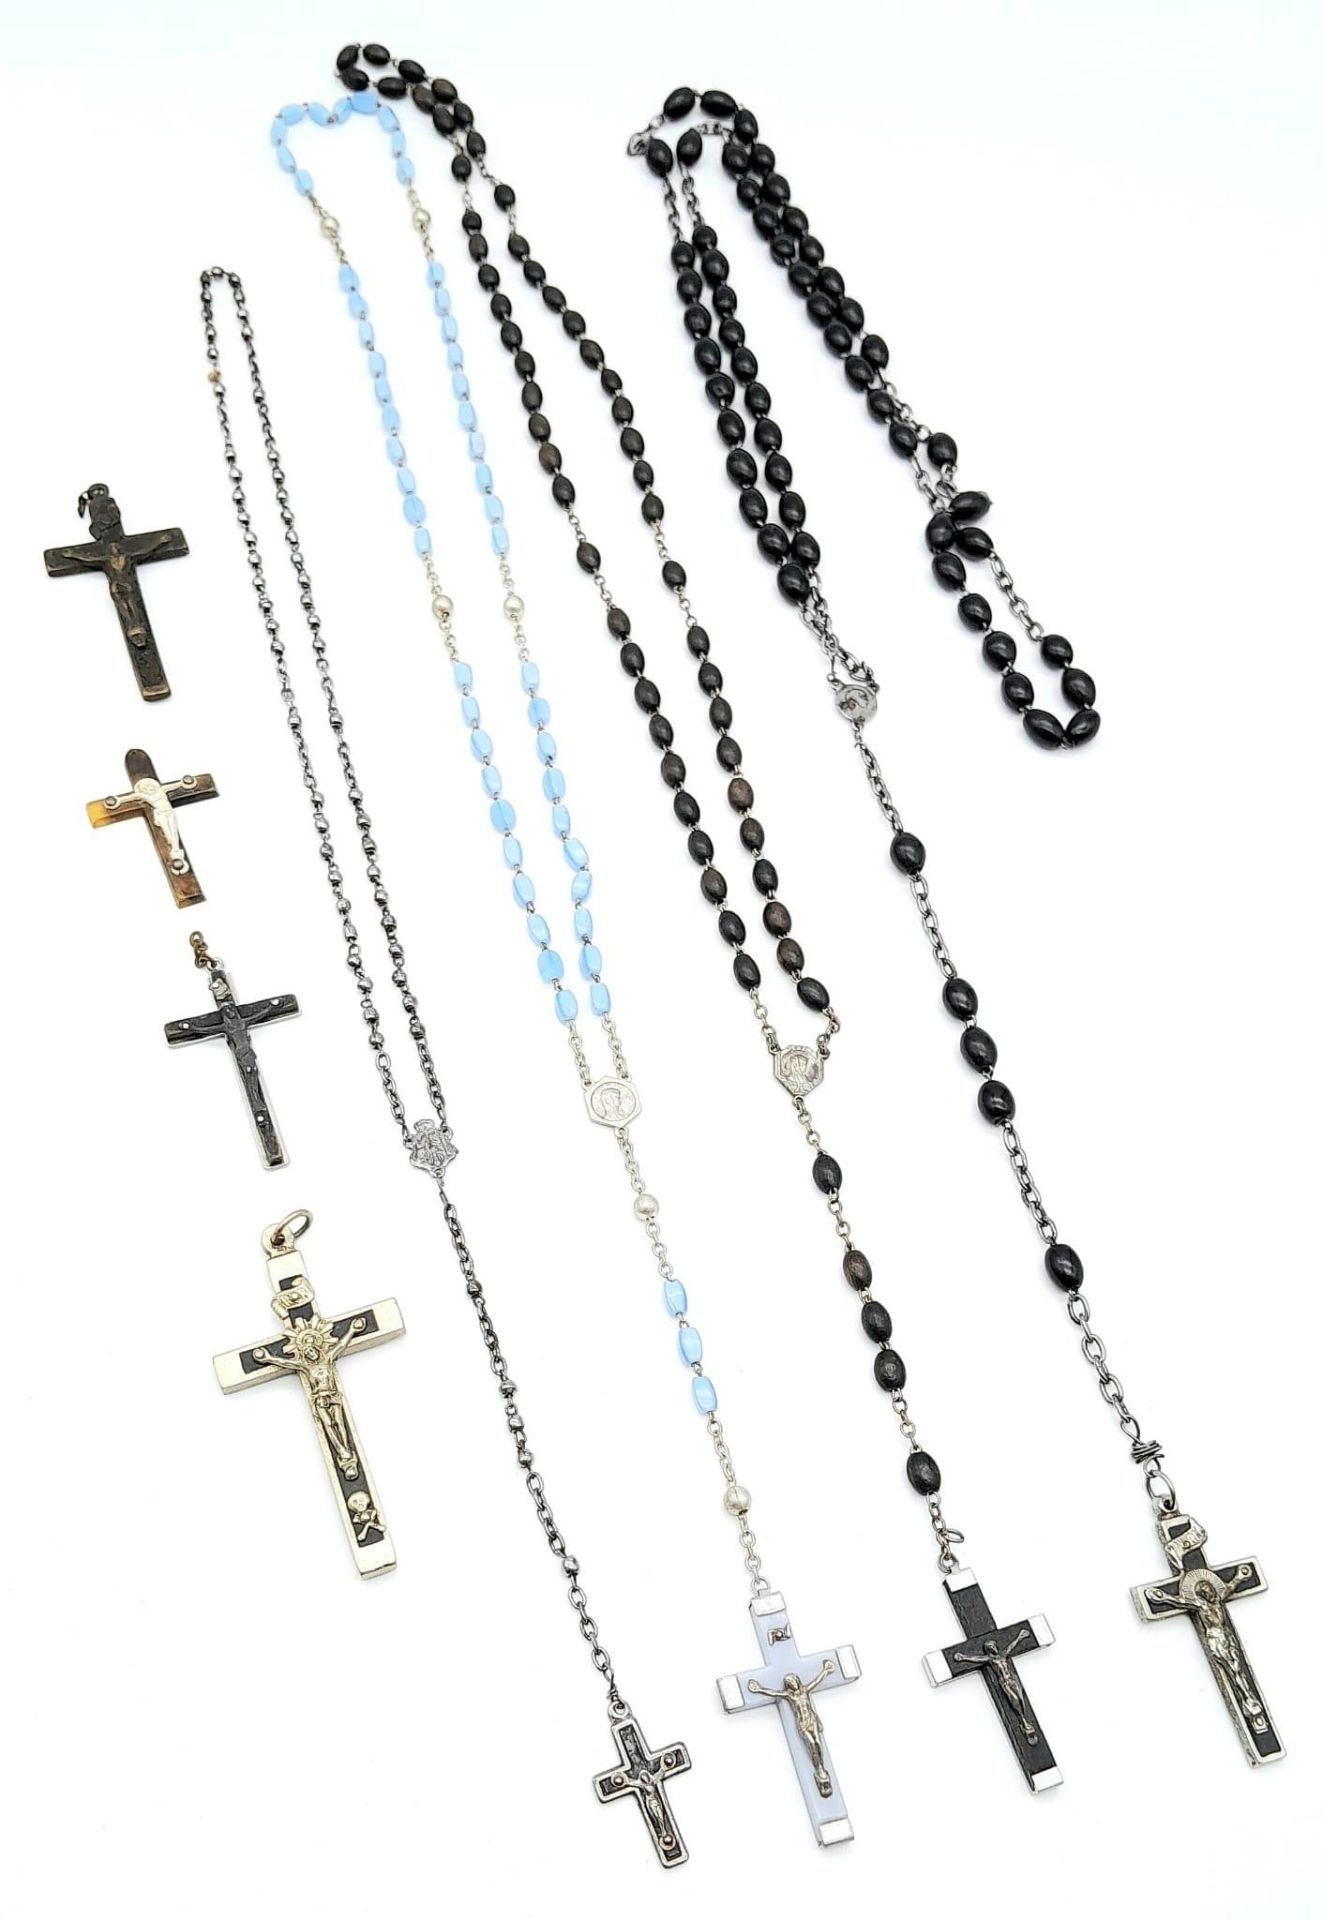 A Small Collection of Crucifix Pendants and Prayer Beads. All kept in a small decorative wood box.